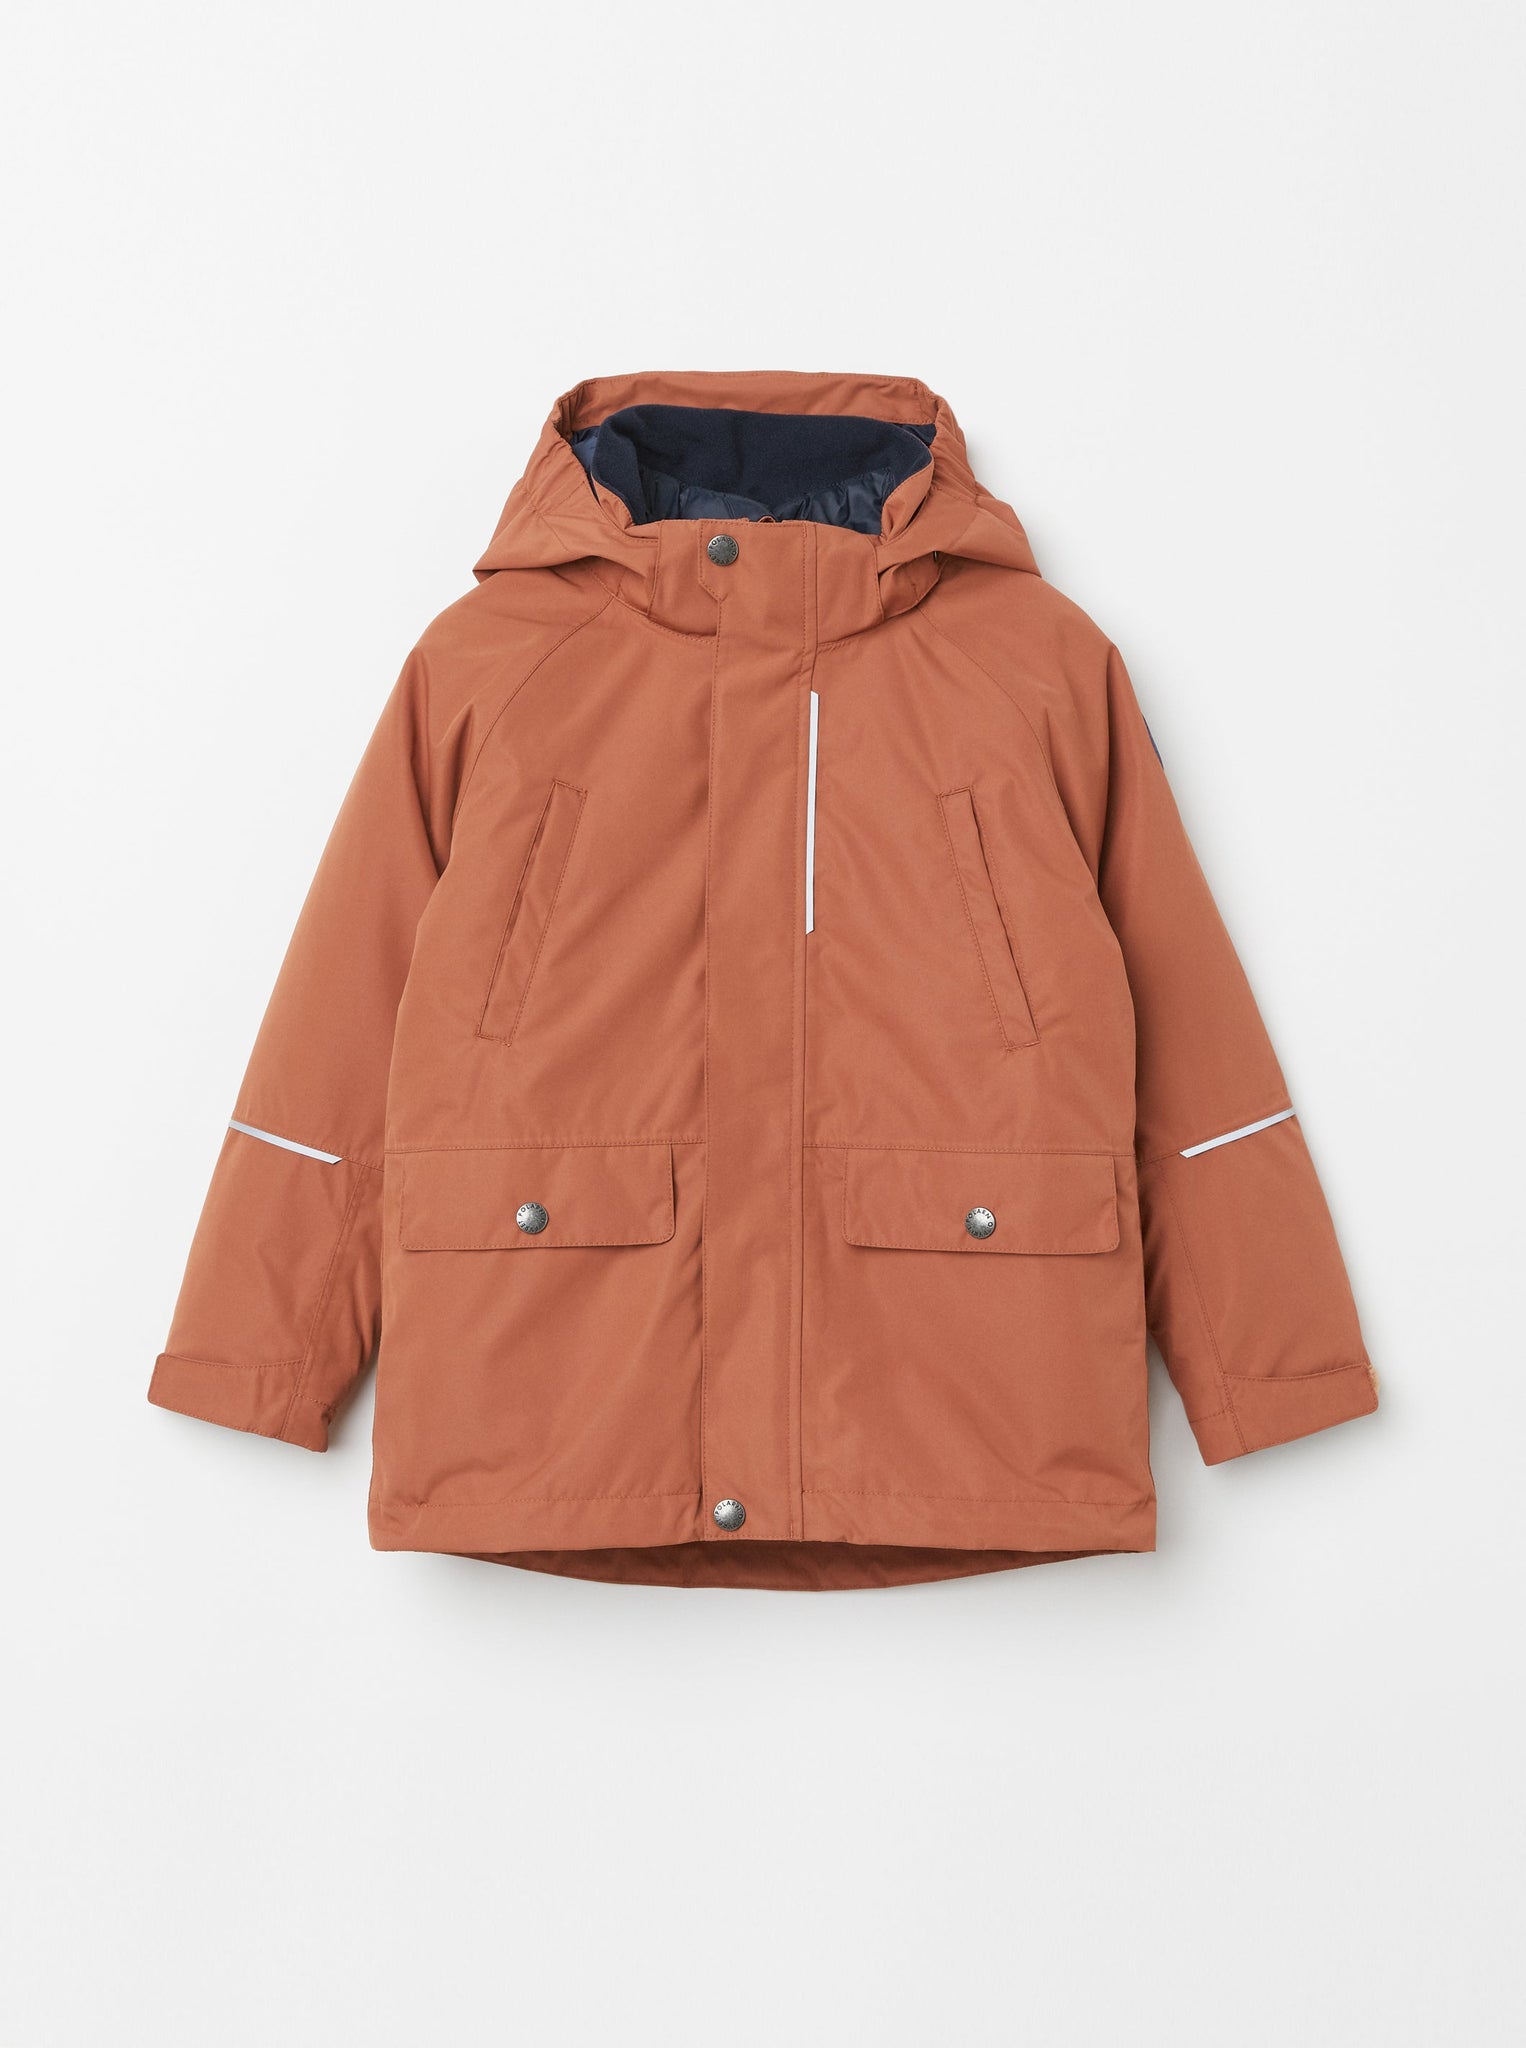 Orange 3-In-1 Kids Coat from the Polarn O. Pyret kidswear collection. Made from sustainable sources.